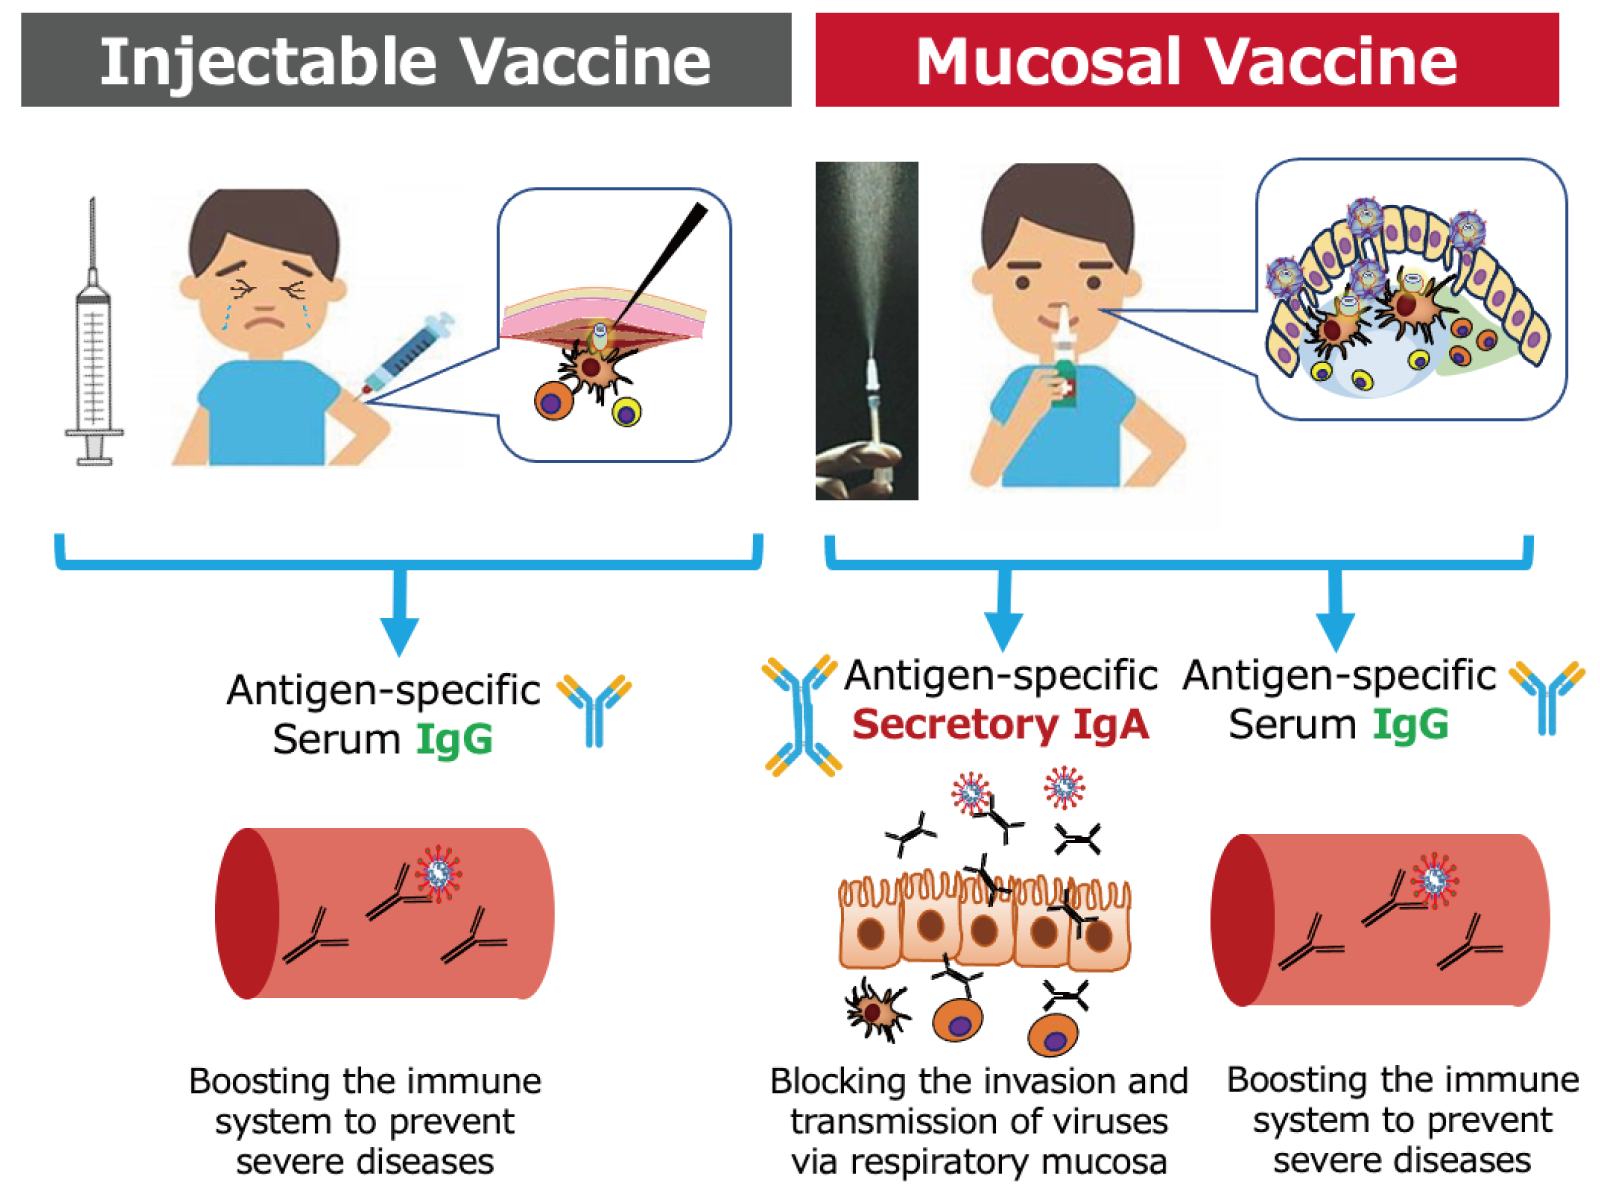 Development of Mucosal Vaccines and Immunotherapies at International Research Center for Allergy and Mucosal Vaccines